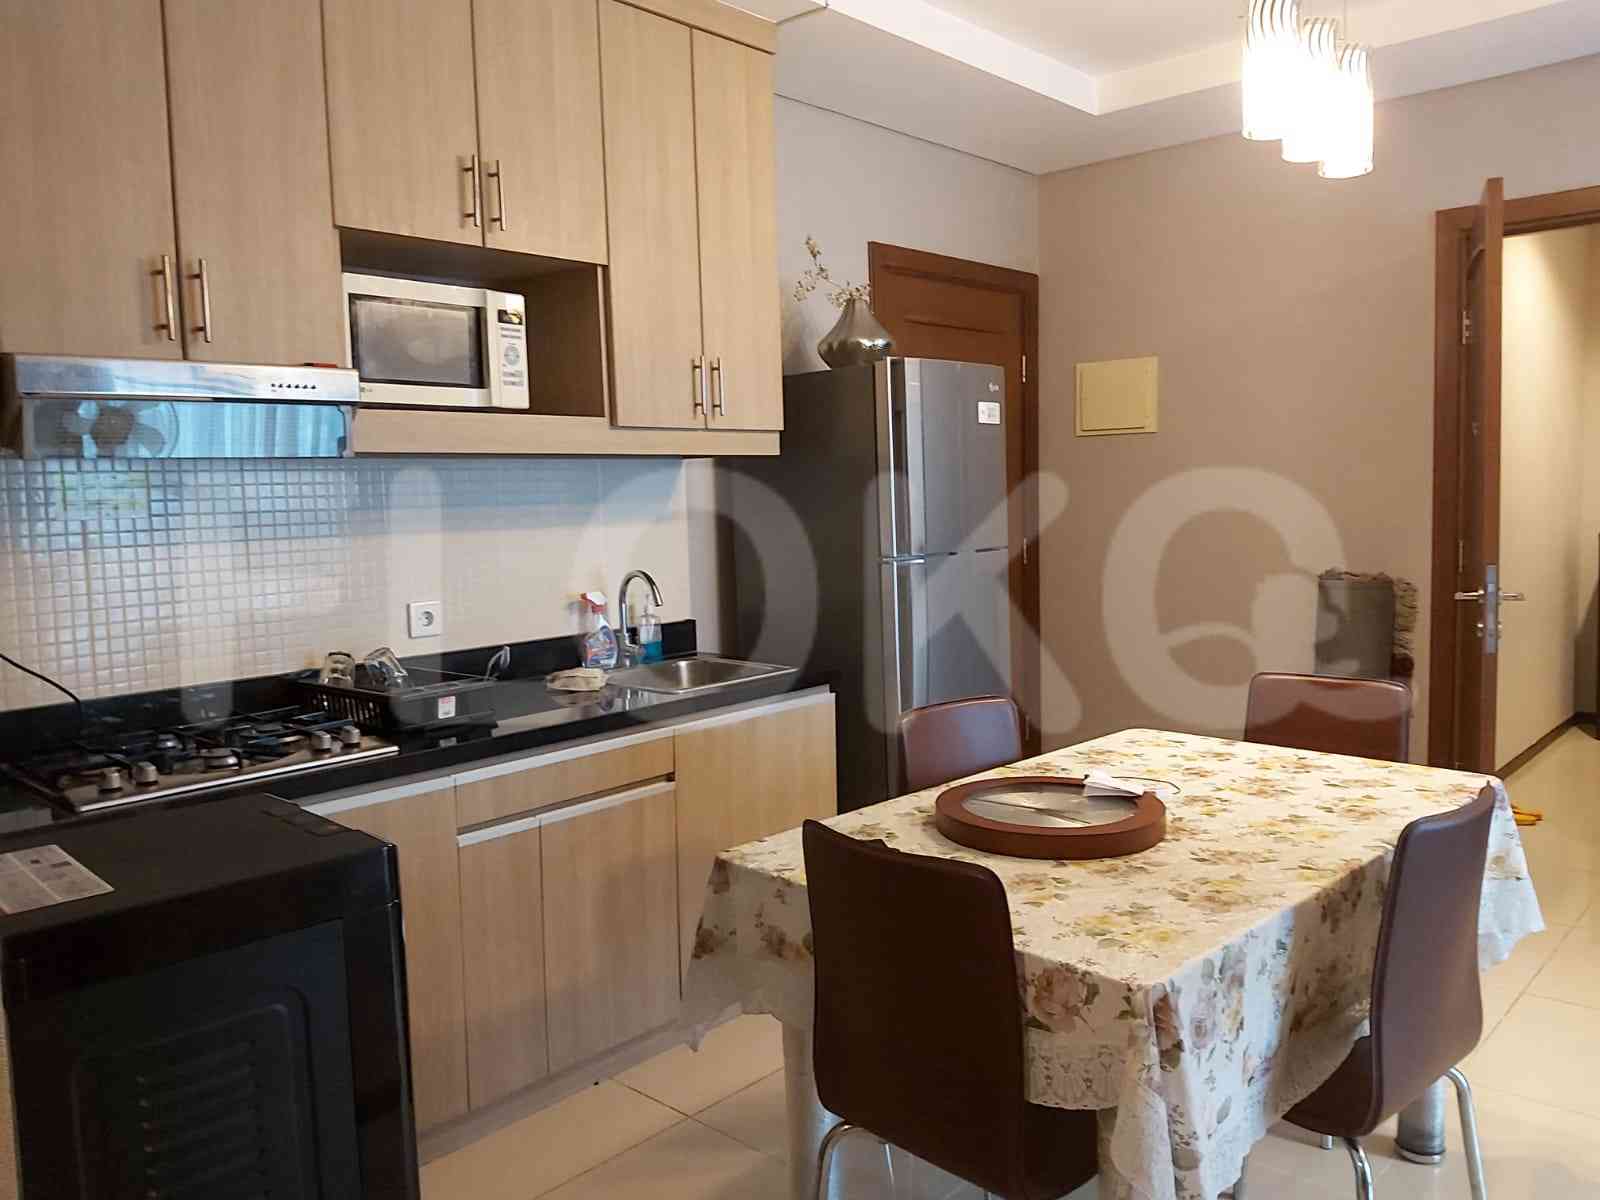 2 Bedroom on 22nd Floor for Rent in Thamrin Executive Residence - fth9e9 2